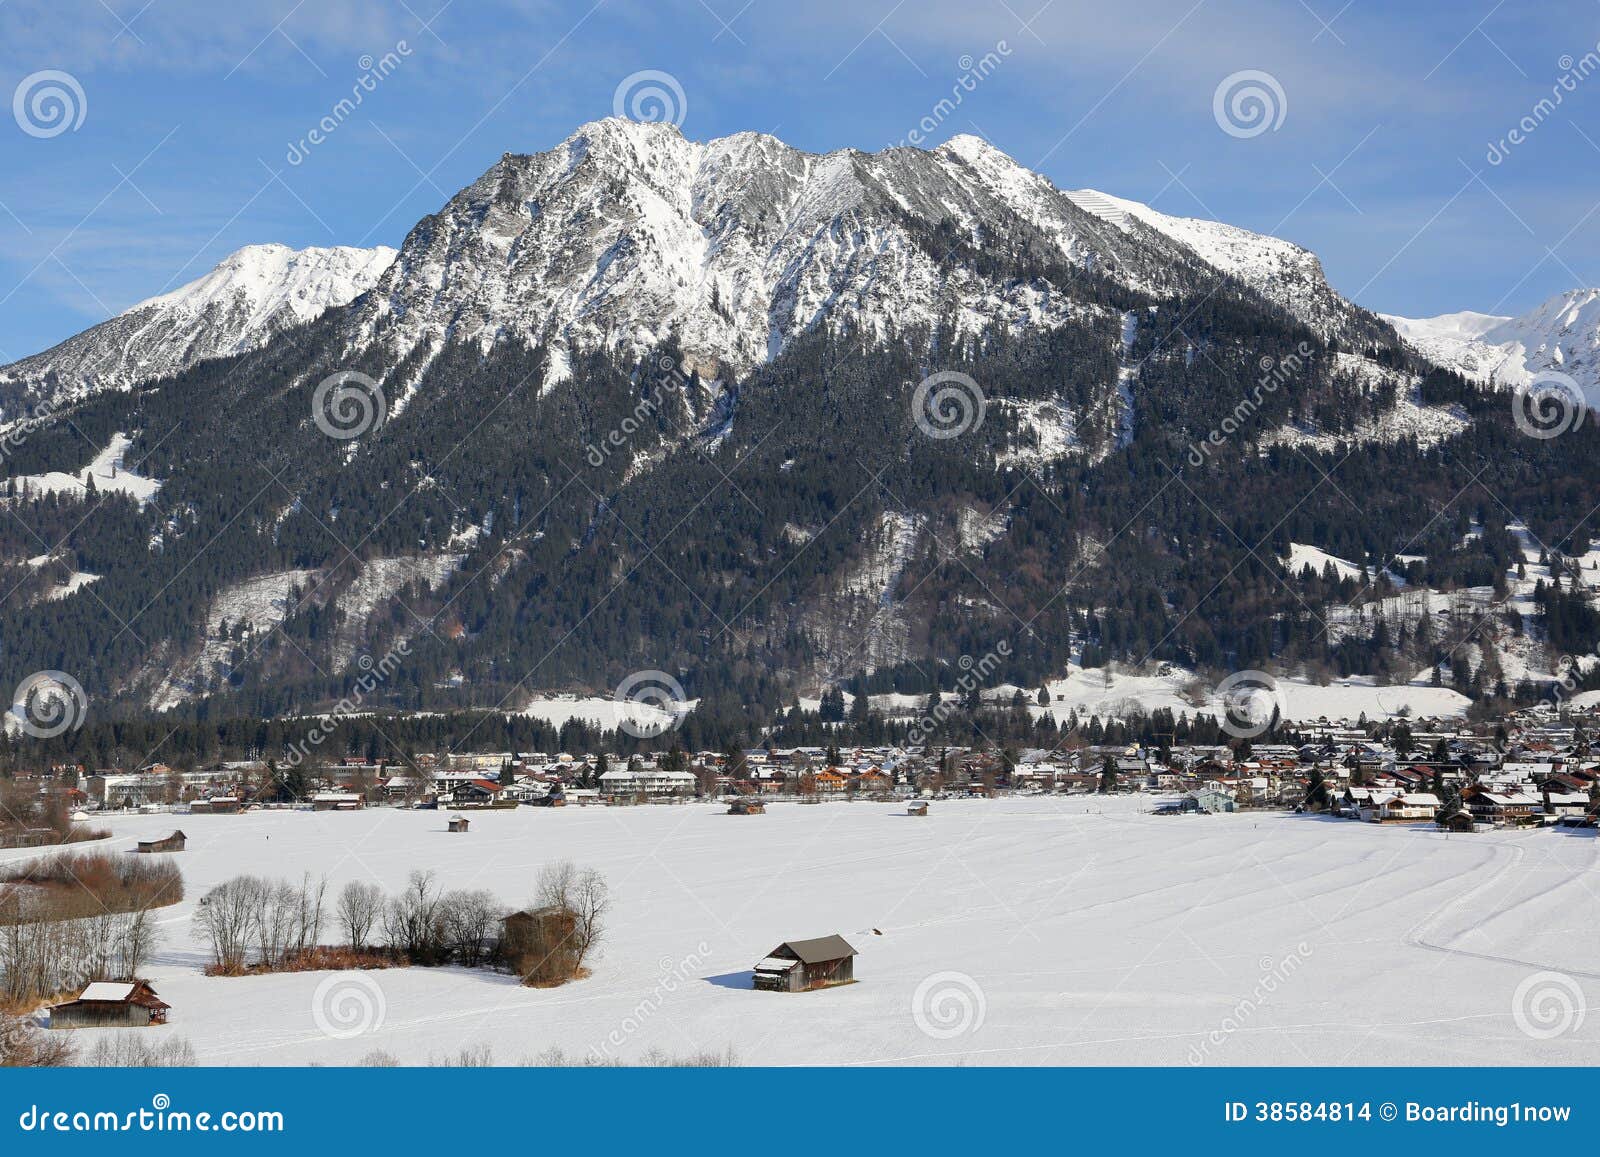 oberstdorf mountains alps with snow in winter